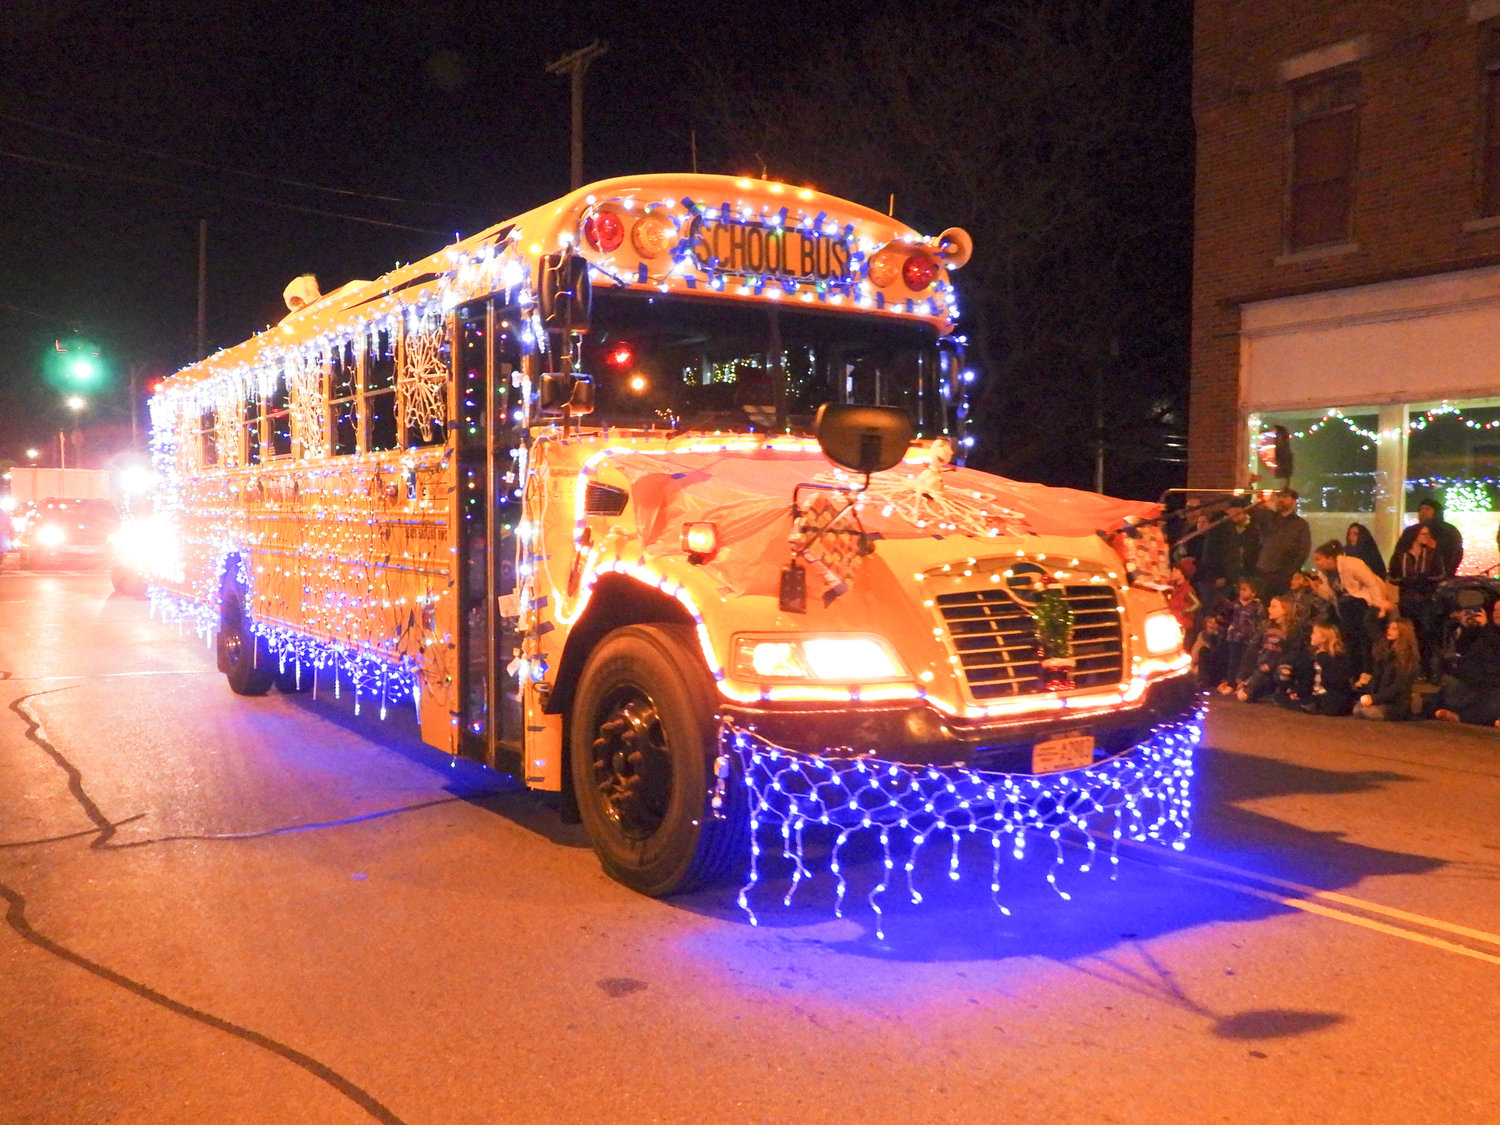 The Canastota Parade of Lights saw people fill the streets Saturday night to welcome in the holiday season. Pictured is Canastota Central School bus, all decorated for the holiday season.